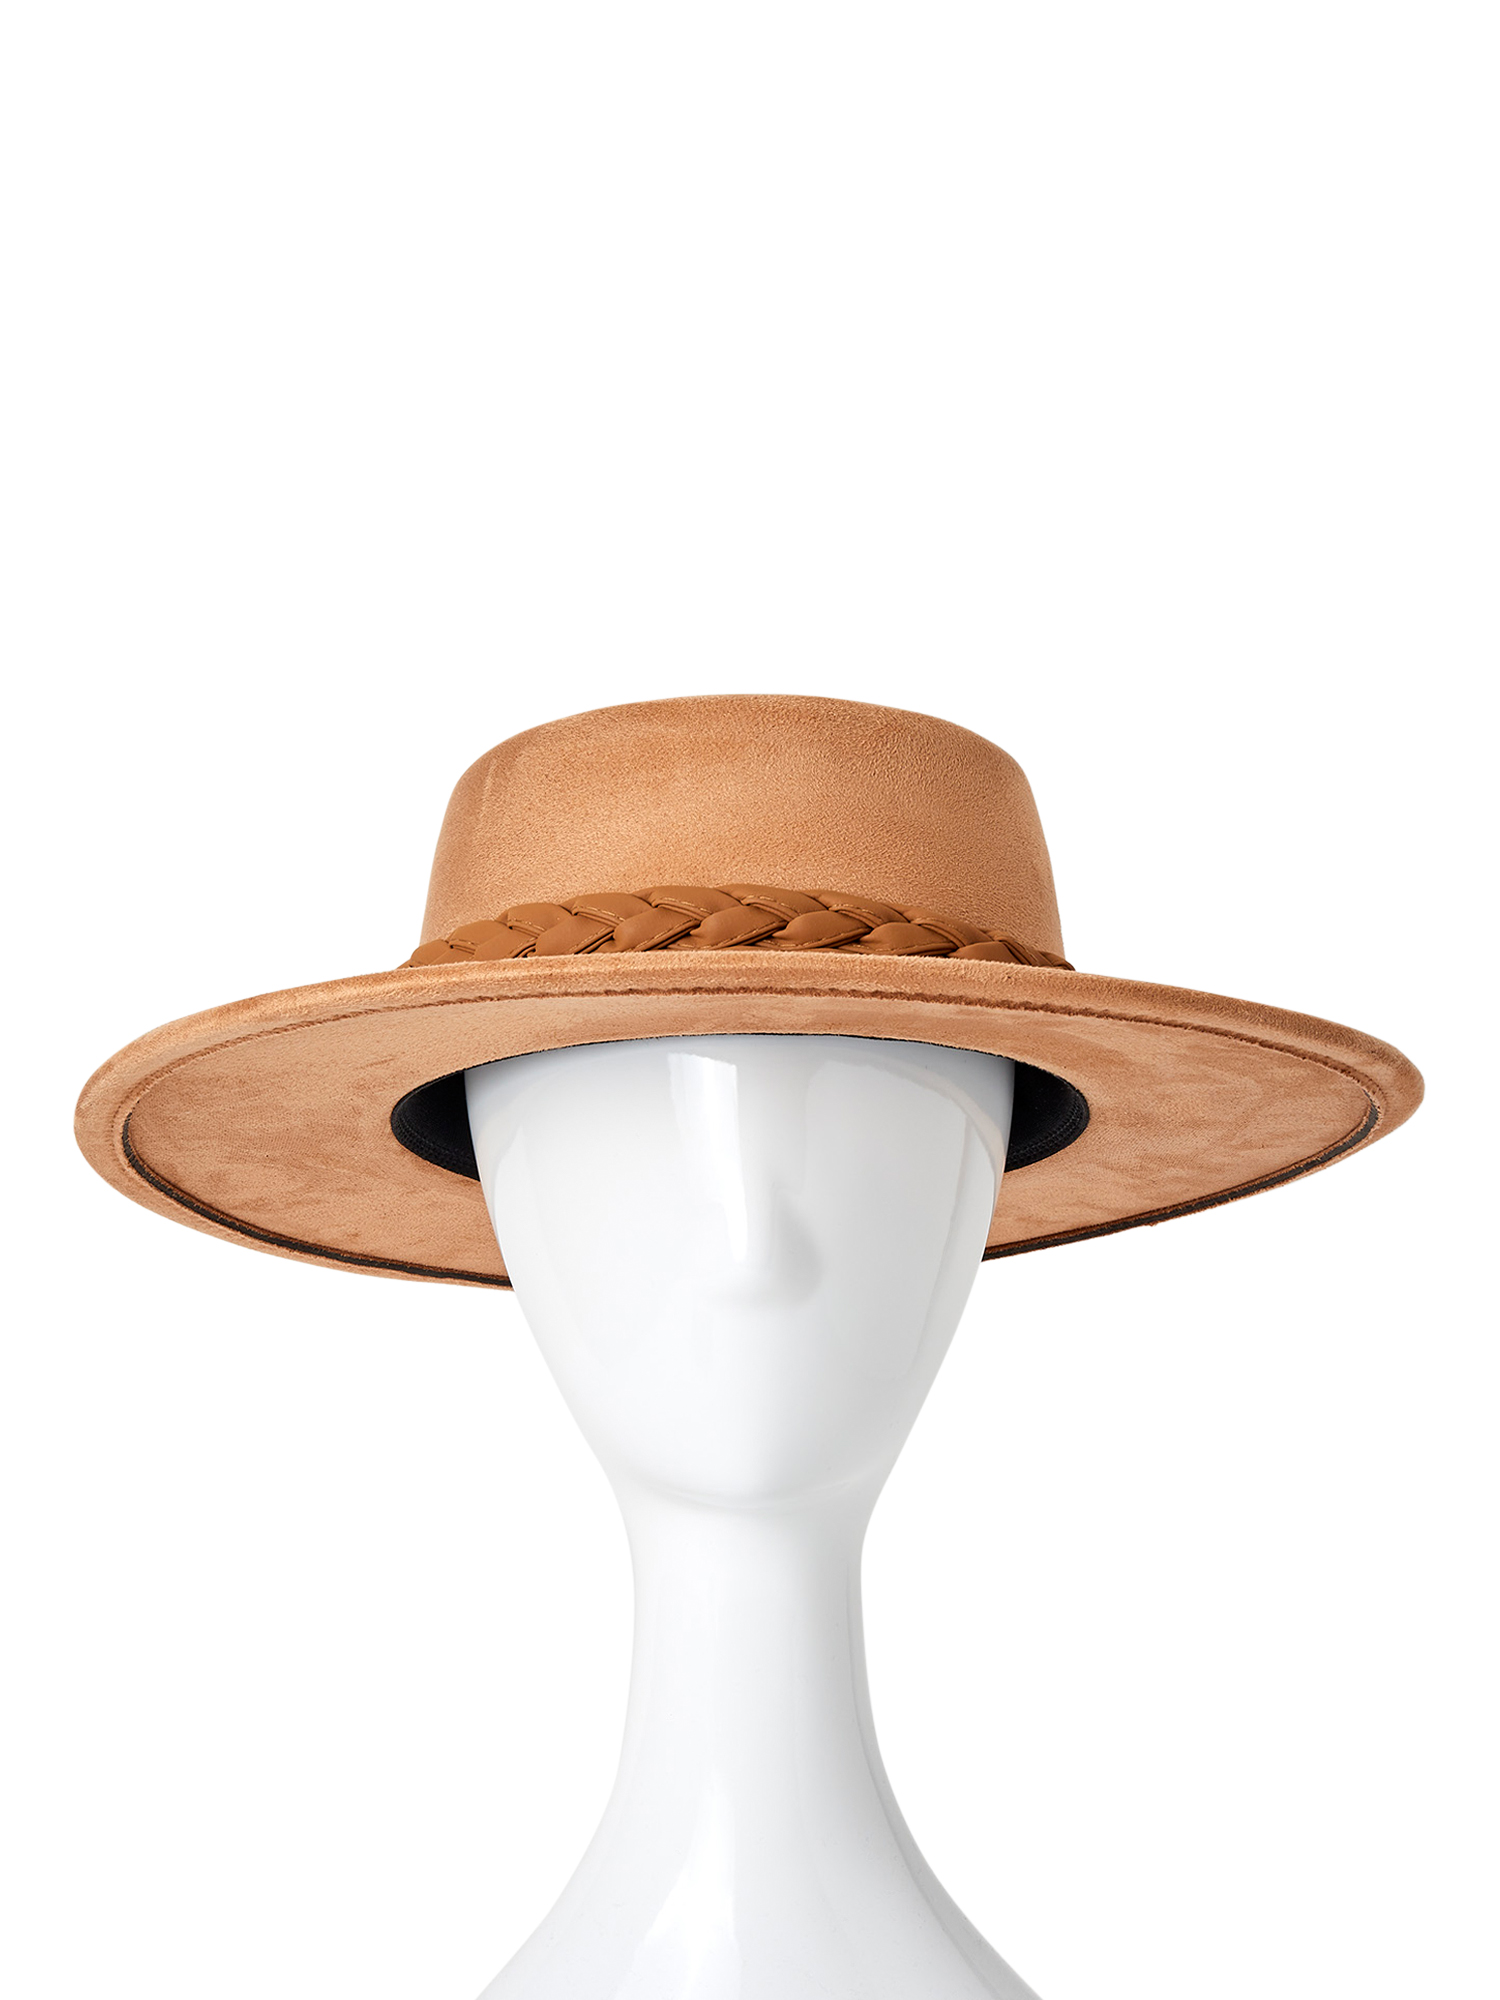 Time and Tru Adult Women's Boater Hat with Braided Trim - image 3 of 3